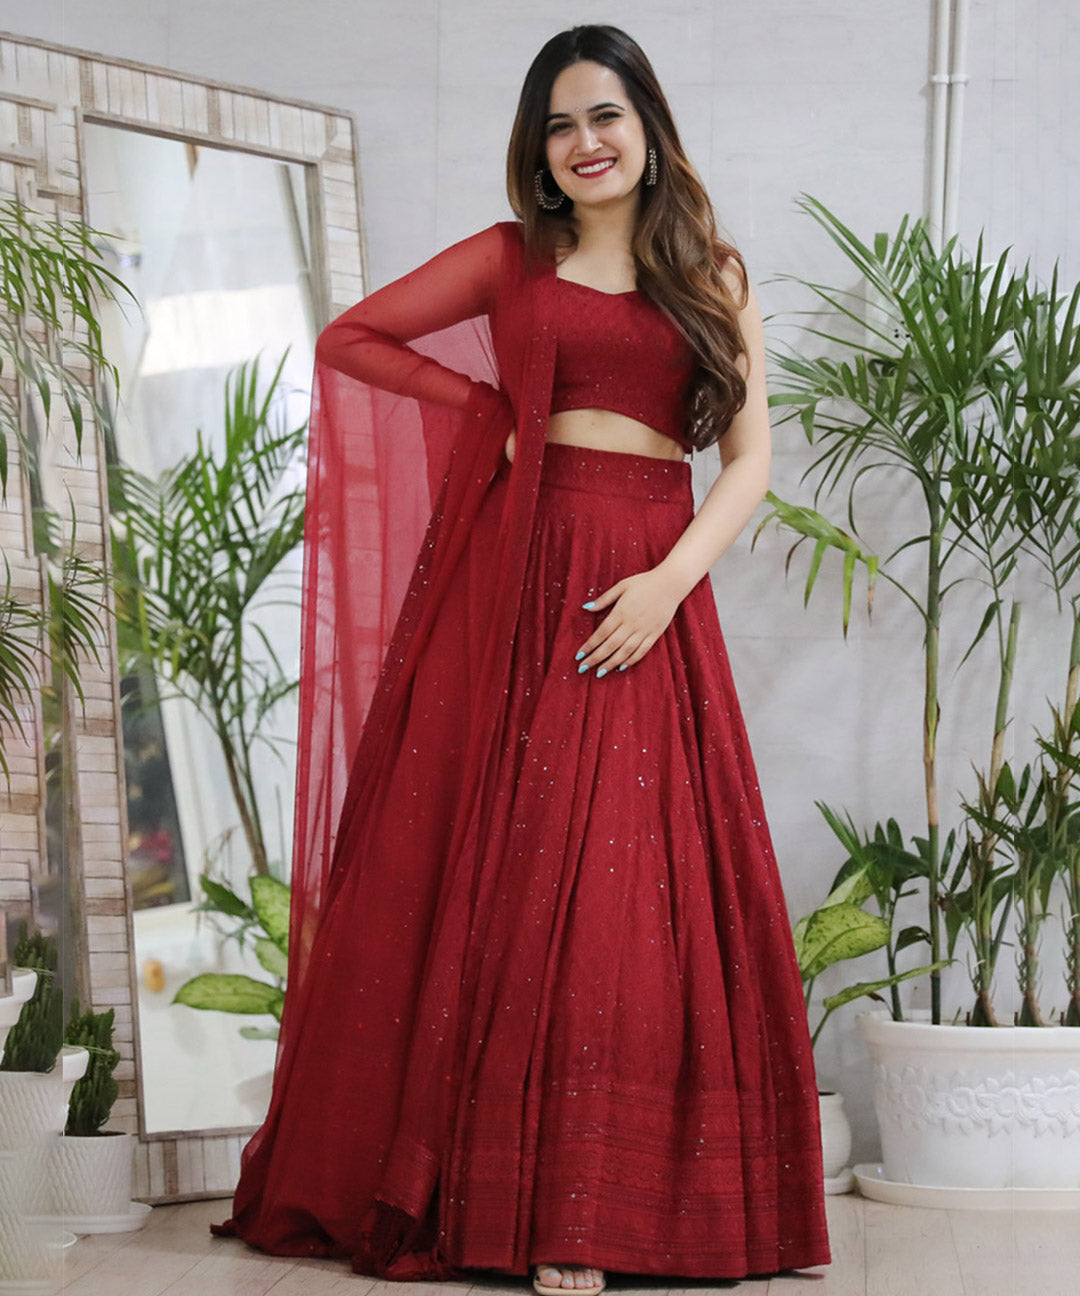 Different Styles of Lehenga Dresses: From Bridal Wear to Casual Chic |  Ethnic Plus